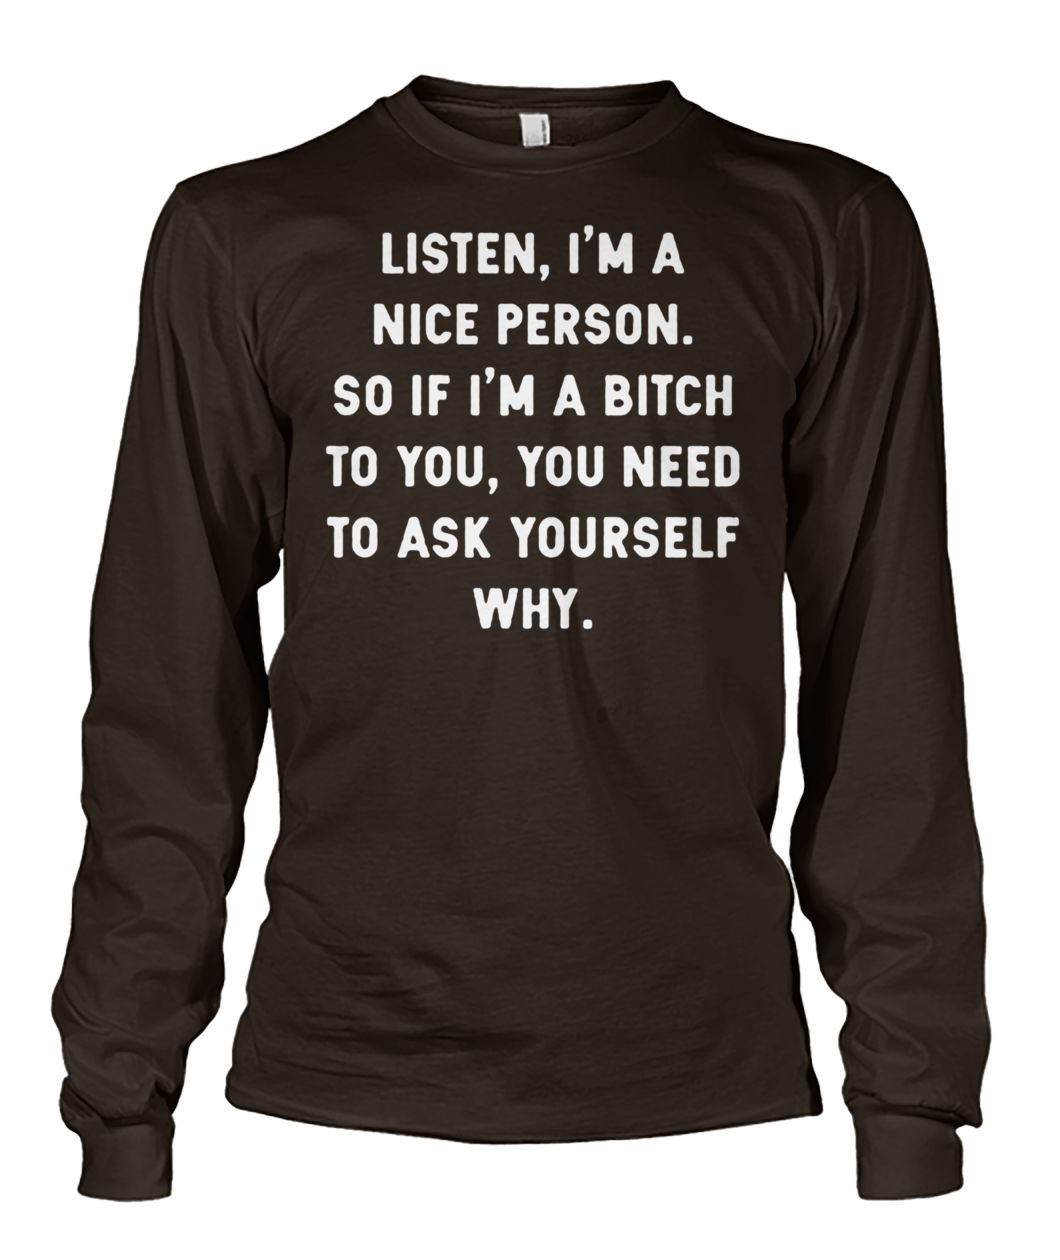 Listen I'm a nice person so if I'm a bitch to you you need to ask yourself why unisex long sleeve